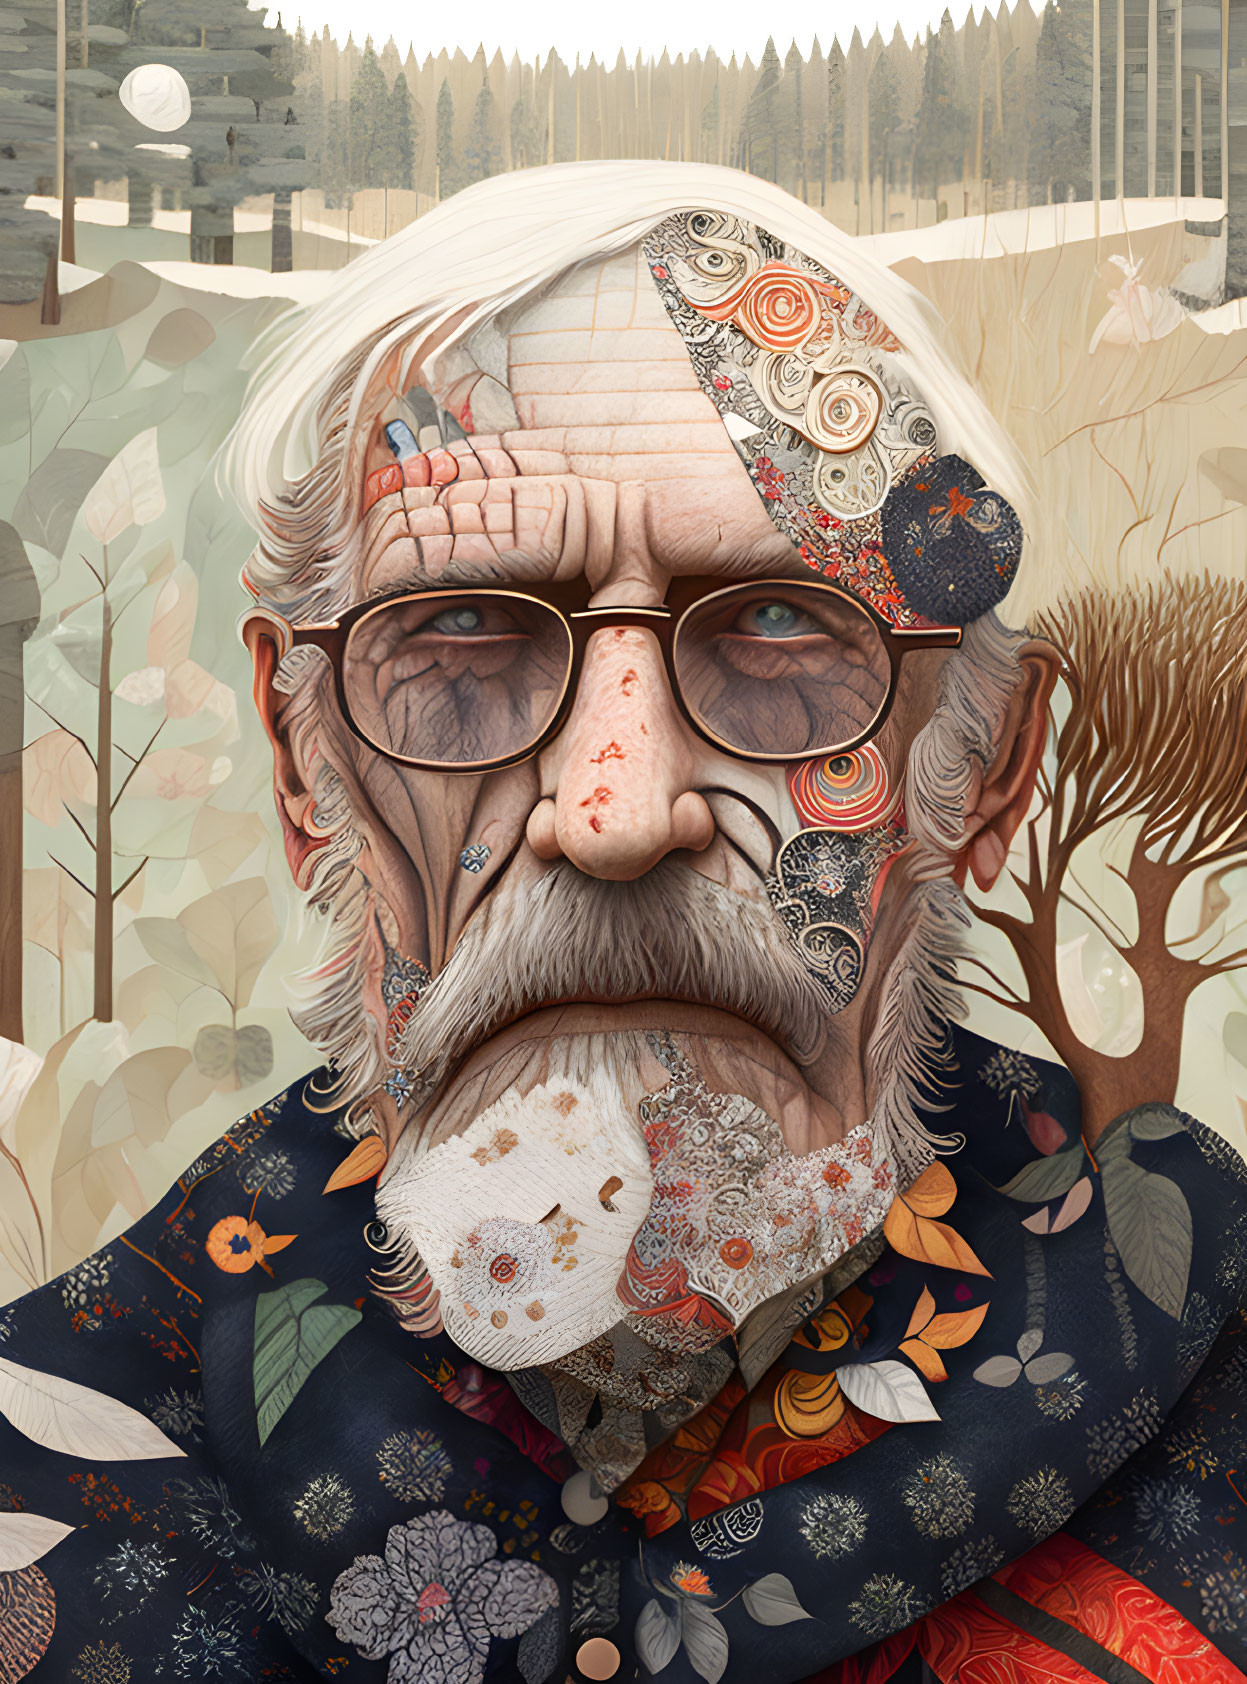 Elderly man with intricate patterns, trees, and industrial backdrop